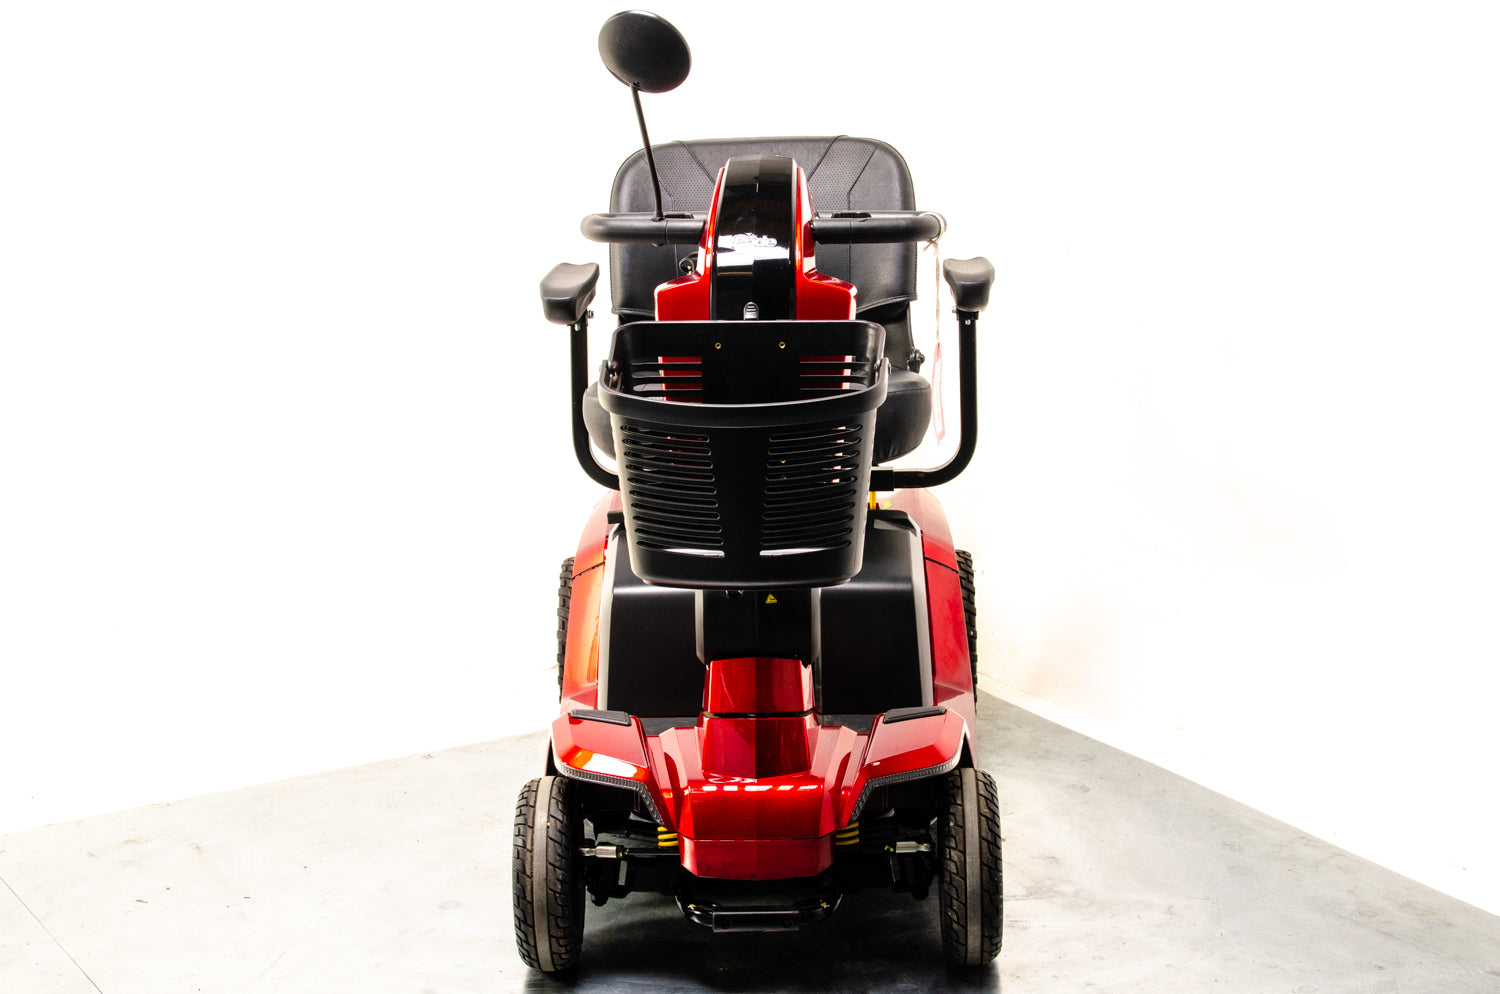 Pride Zero Turn 10 Used Mobility Scooter 8mph Transportable LED Dual Motor Suspension USB Charger